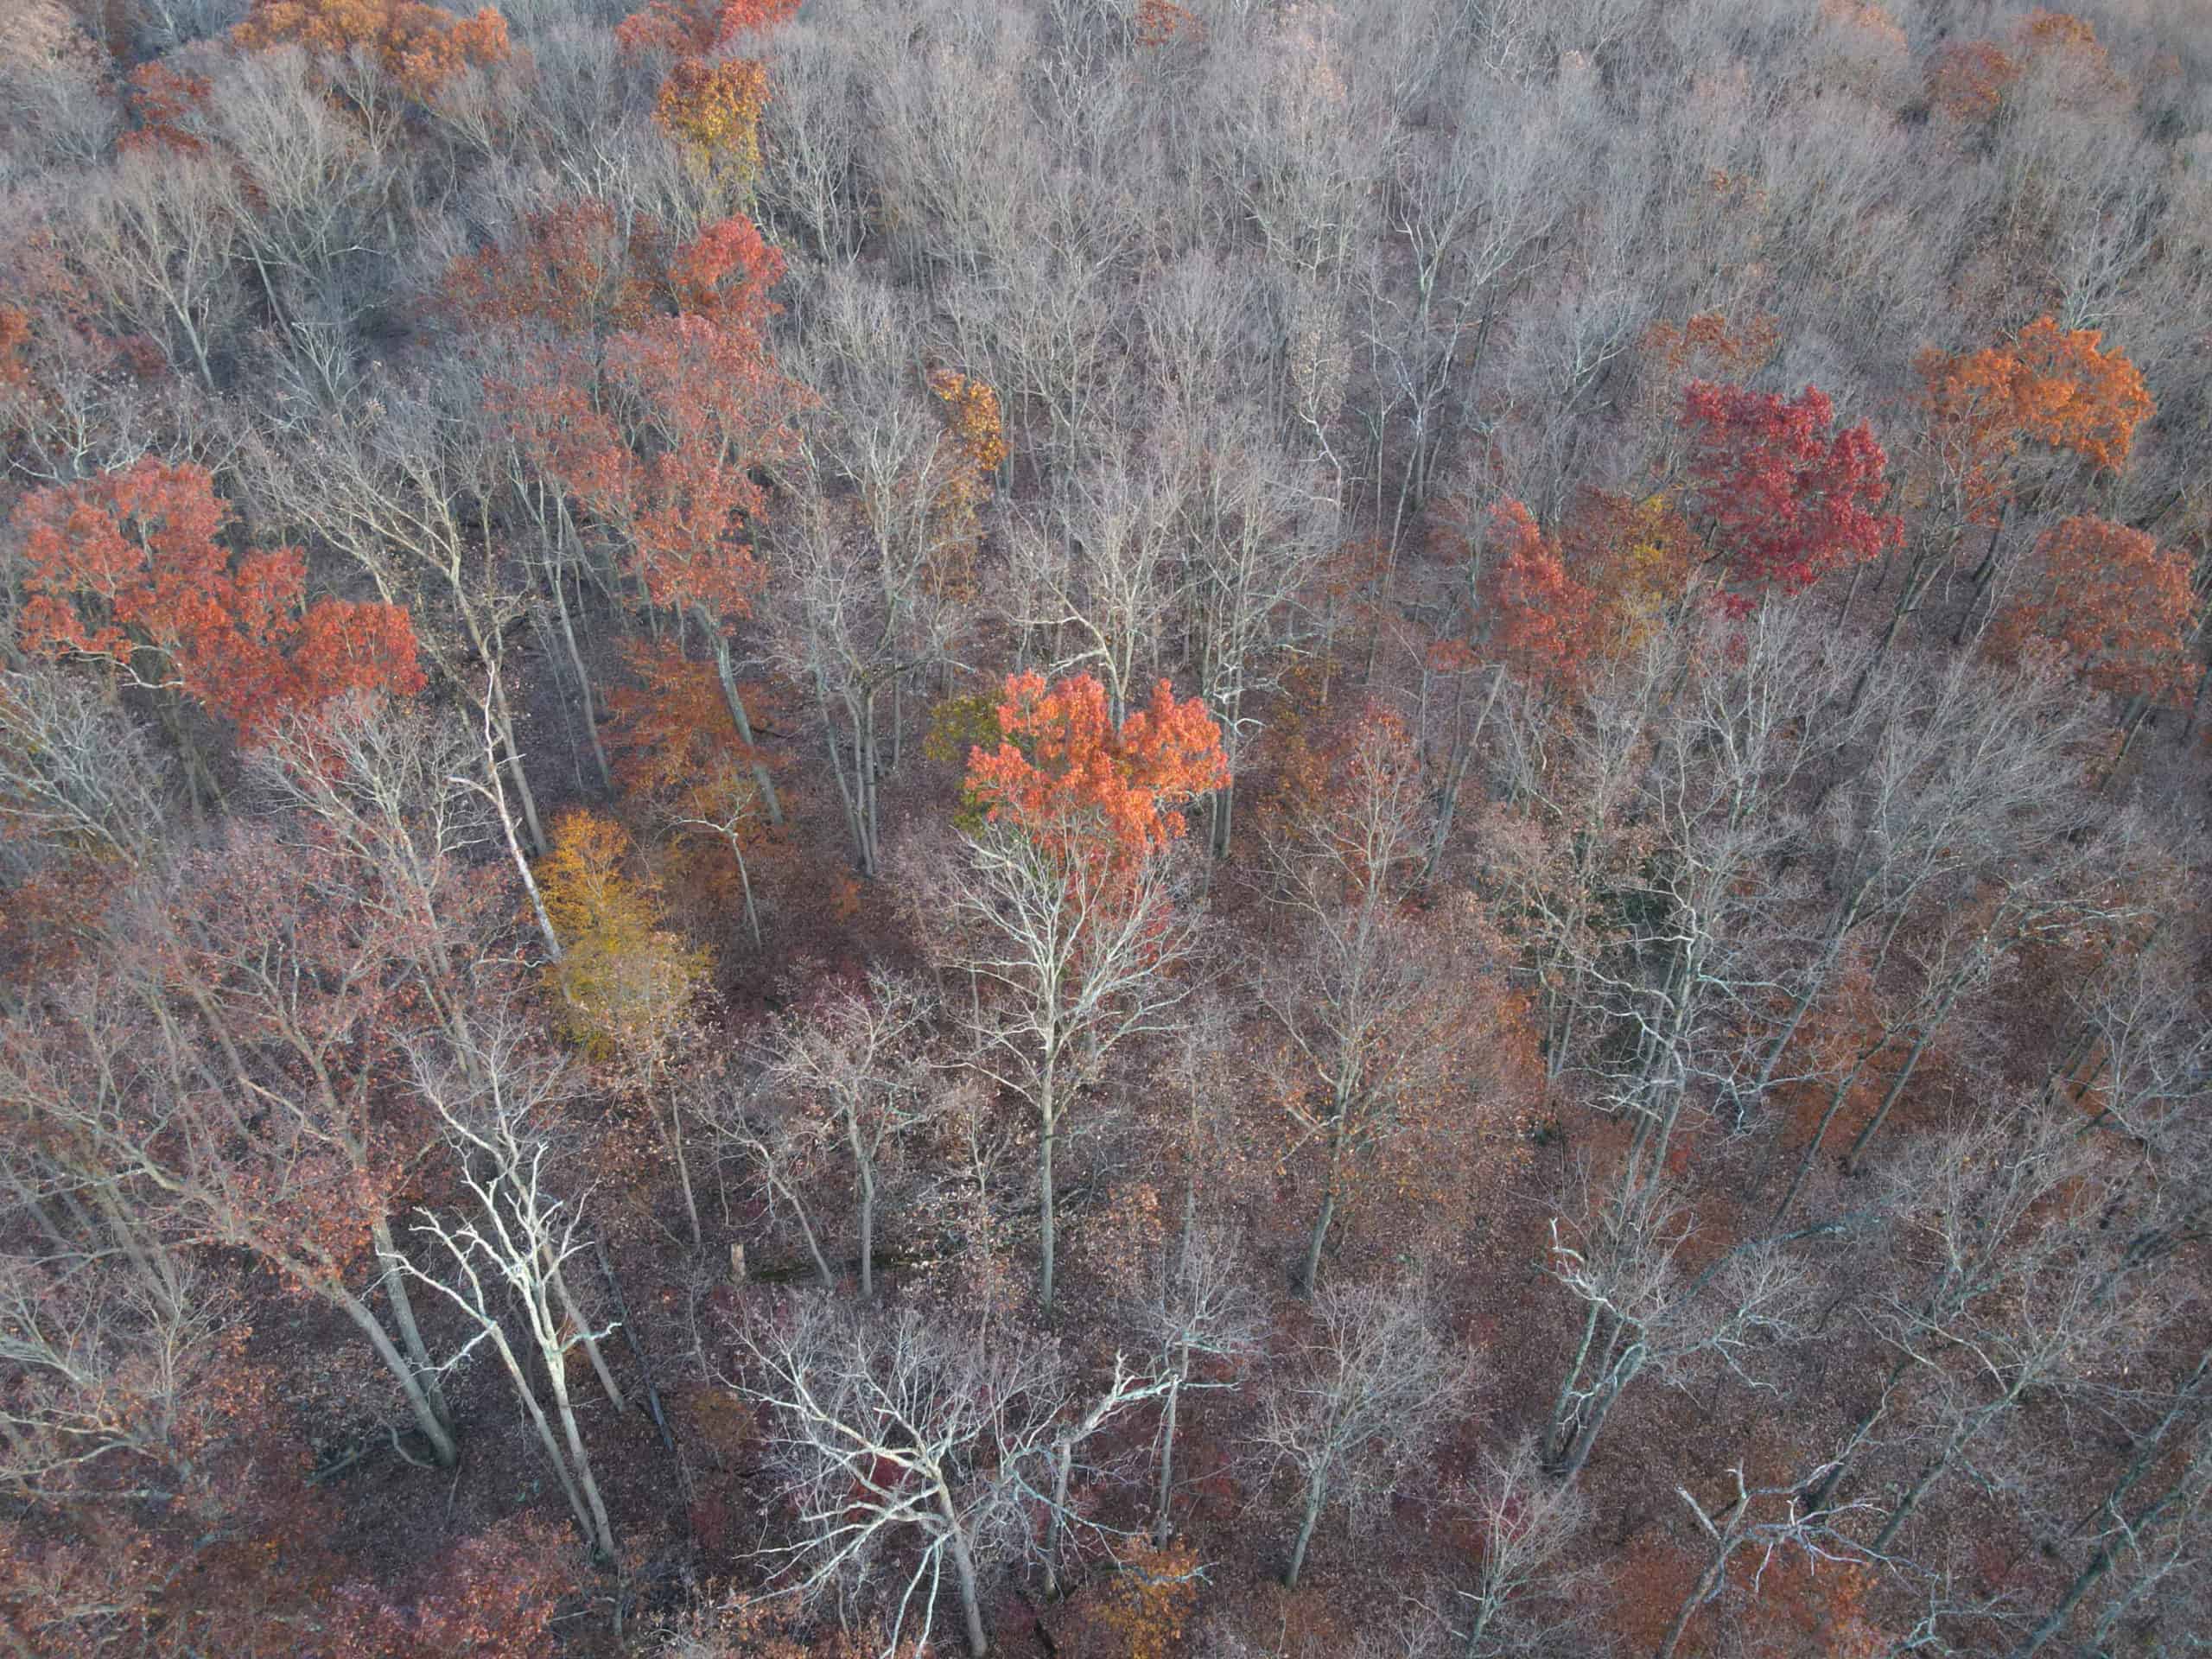 Aerial view of forest in late autumn with only oaks retaining leaves